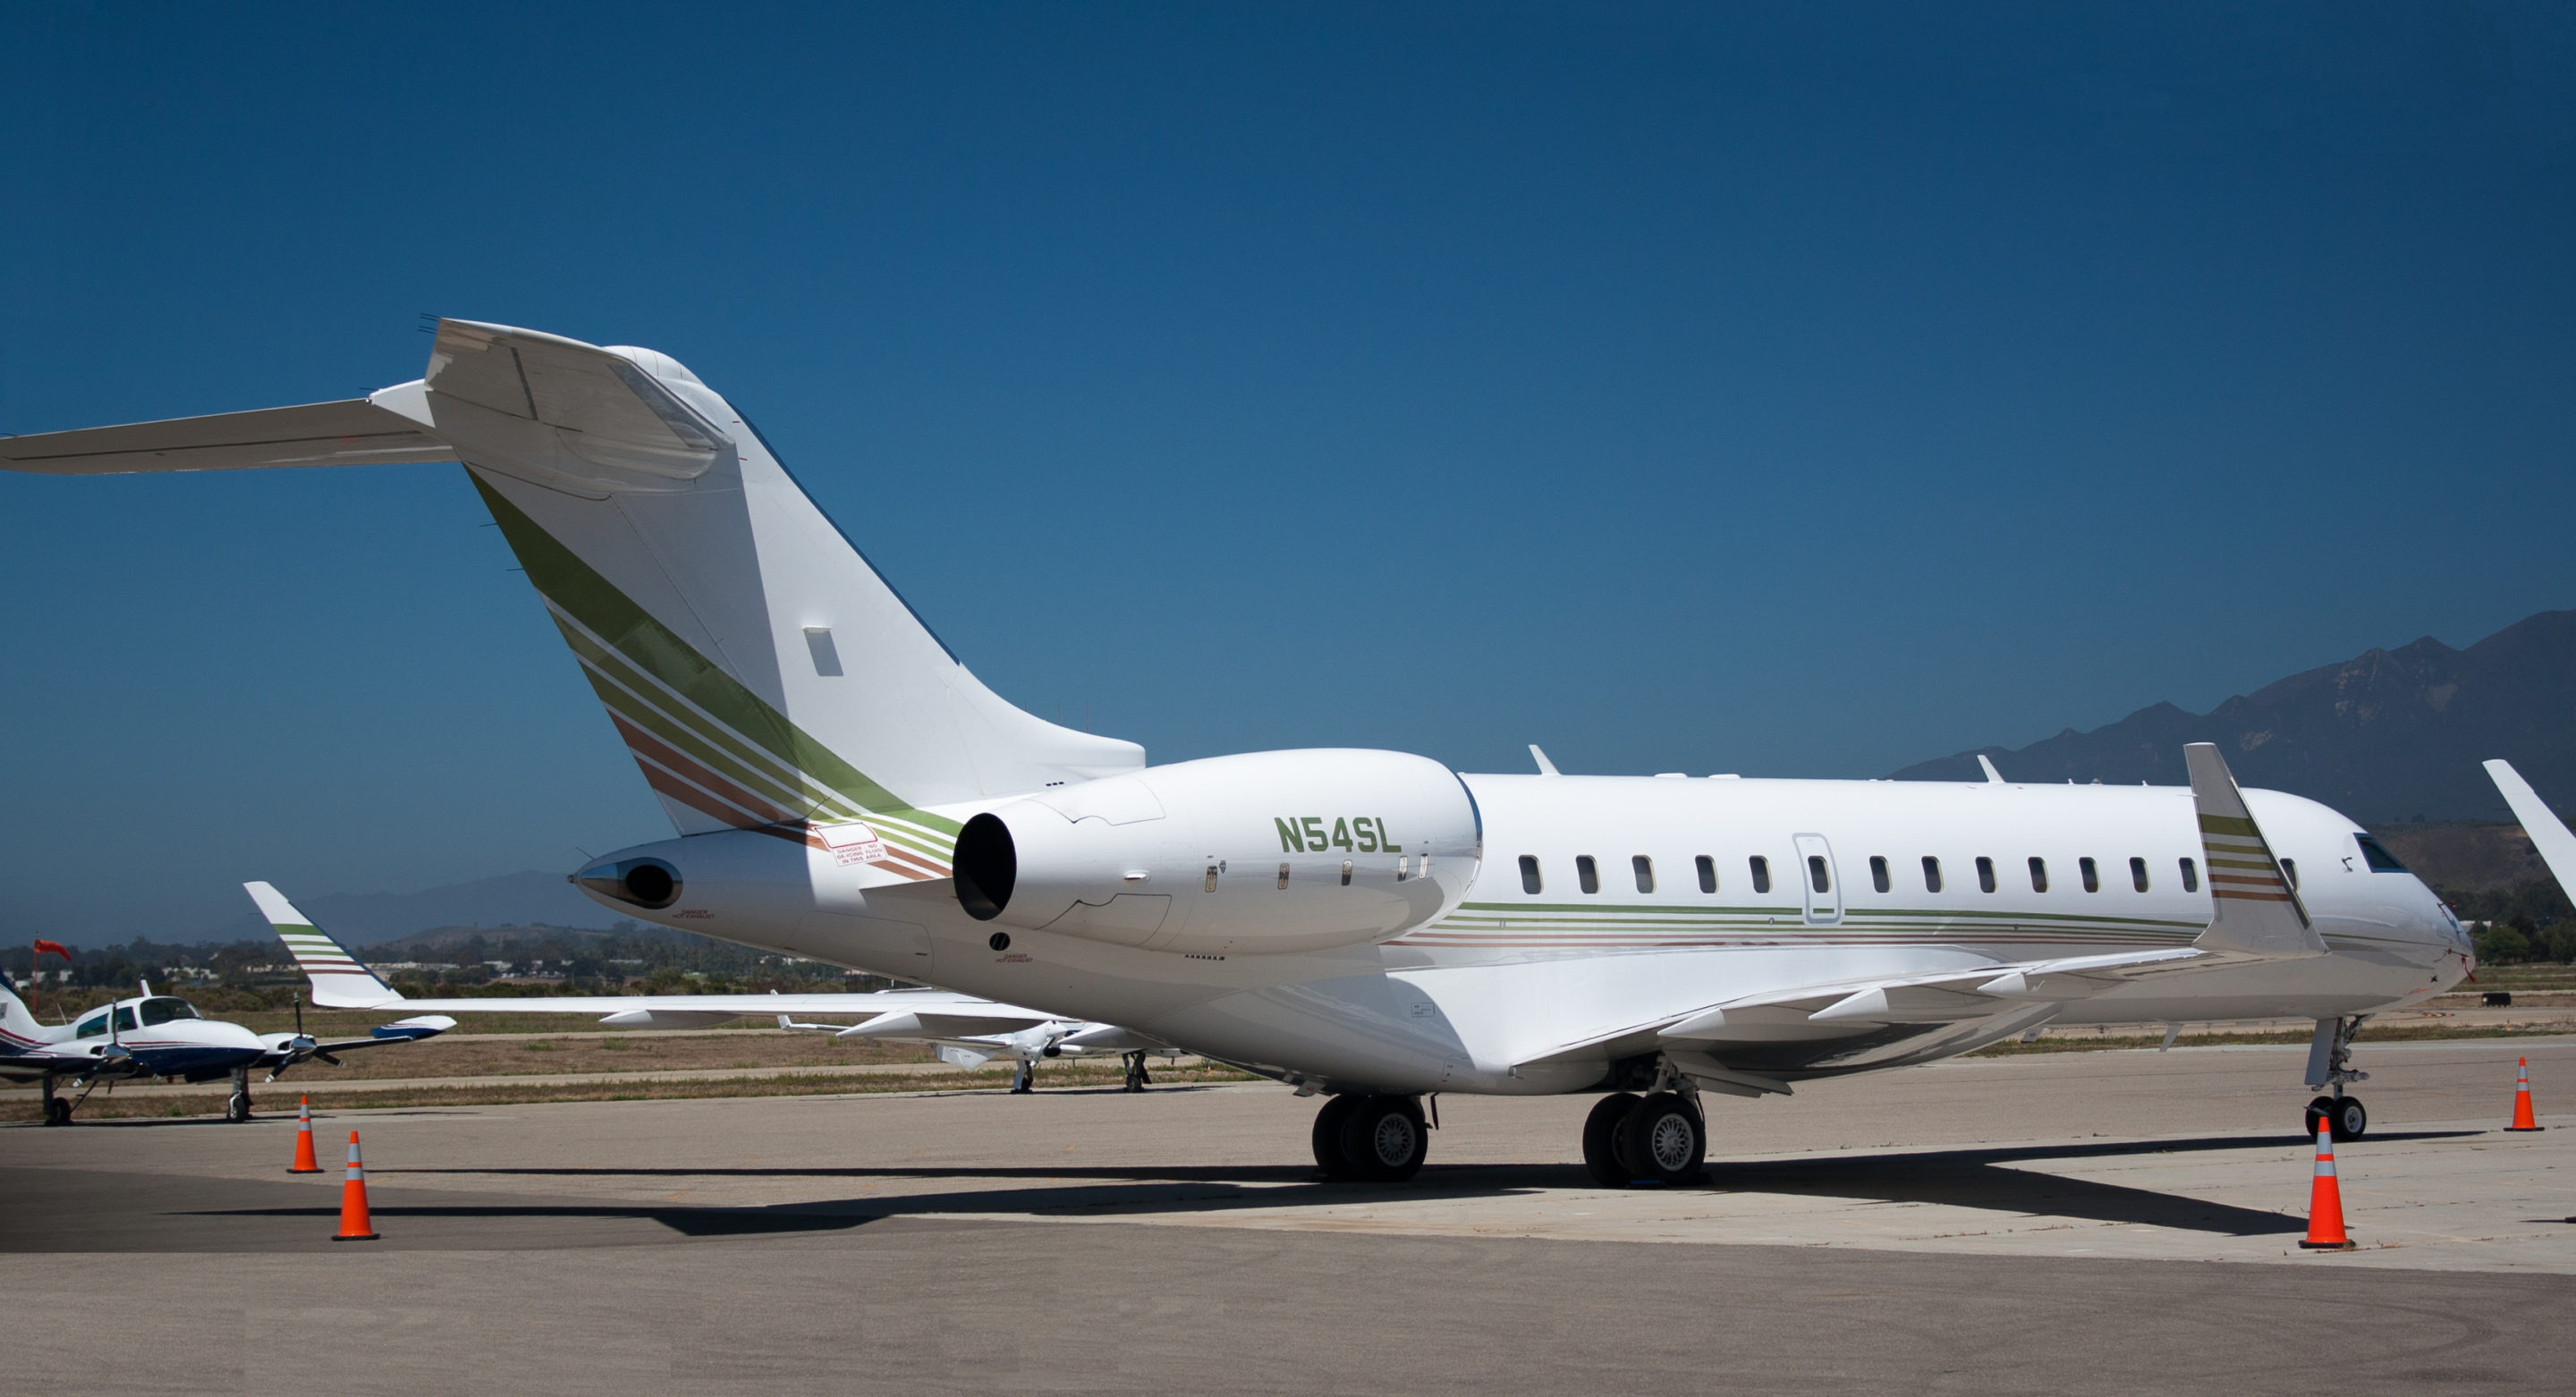 jet expenses, gulfstream g450, gulfstream g450 price, cost of owning a private jet, g450, g4 plane, g4 jet, gulfstream price, gulfstream g650 price, g450 price, how much does it cost to run a private jet, how much does it cost to own a private jet, gulfstream g450 jet price, the cost of owning a private jet, gulfstream g4, g650 price, private jet cost to own, g4 plane price, gulfstream g550 price, g5 jet price, g4 jet price, private jet annual maintenance cost, how much to operate a private jet, g5 jet, gulfstream cost, g6 jet price, g6 plane price, private jet crew cost, g 450, g450 plane, cost to maintain private jet, how much does a gulfstream g450 cost, g4 airplane, private jet maintenance cost, g450 jet price, gulfstream g450 rance, how much does it cost to fuel a private jet, gulfstream g4 price, gulfstream jet cost, g5 jet cost, private jet operating costs, how much does a g5 cost, g5 plane, gulfstream 4, gulfstream iv operating cost, gulfstream jet price, gulfstream g650 cost, how much to run a private jet, gulfstream g550 operating cost, giv x g450 how much does a gulfstream cost, cost of jet ownership, how much is a g5 jet, how much is a g5, learjet costof ownership, g450 range, g6 private jet cost, gulfstream 5 price tag, cost of owning a jet, how much is a g6 jet, gulfstream g550 cost, g550 cost, private jet expenses, gulfstream g5 price, g550 price, g5 airplane cost, gulfstream lane price, g5 cost, g6 plane, how much is a new gulfstream g550, how much does a g5 private jet cost, how much cost to own a private jet, g5 cost, private jet service cost, g5 plane price, gulfstream g450 interior, g450 cost, how much is it to buy a private jet, g450 price new, how much does it cost to operate a private jet, g4 jet cost, g450 et, how much does a jet cost to buy, g450 private jet, gulfstream g500 operating costs, g4 private jet price, g4 airplane cost, g6 airplane price, gulfstream g450 cost, gulfstream g55, how much does it cost to maintain a private jet, how much does it cost to maintain a private jet, how much does a g6 cost, gulfstream g450 cost, fulgstream g450 cost per hour, gulfstream cost of ownership, gulfstream g450 price new, g4 plane cost, how much is a gulfstream 6, how much does a g4 cost, how much does a g6 jet cost, g5 cost per hour, g6 plane cost, how much is a g4 jet, private jet ownership cost, gulfstream v, gulfstream g550 operating cost, private jet operating cost, best private jets 2017, citation jet cost per hou, private jet fuel, cessna citation cost per hour, honda jet price, honda jet for sale, honda jet cost, honda jet cost per hour, how much does a honda jet cost, private jet operating costs, how much is a honda jet, private jet cost, honda jet, honda light jet cost, honda jet operating cost, honda jet msrp, cost of owning a jet, how much does the honda jet cost, honda jet price uk, cost of new honda jet, honda ha 420 hondajet price, cost jet, honda vli price, new honda jet price, honda jet price 2017, how much to operate a private jet, honda plane price, honda private jet, how much is a jet ski, jet ski cost, how much does a jet ski cost, average jet ski price, how much jet ski cost, cost of owning a jet ski, waverunner cost of ownership, how much does it cost to buy a jet ski, seadoo maintenance cost, how much to winterize a jet ski, jet ski cost of ownership, jet ski repair cost, jet ski maintenance, jet ski service, jet ski prices new, how much does it cost to winterize a jet ski, waverunner cost, how much is a waverunner, how much is a brand new jet ski, how mucch is a used jet ski, jet ski maintenance costs, jet ski service cost, jet ski cost to buy, how to maintain a jet ski, are jet skis worth it, how much does a jet ski engine cost, are jet skis worth the money, is buying a jet ski worth it, zetta jet cost, private jet charter cost, charter jet cost, private jet cost, charter plane cost, private jet rental cost, charter flight cost calculator, charter flight cost, private jet charter prices, how much is a private jet flight, how much to rent a private jet, how much does it cost to rent a private jet, how much to charter a jet, how much to charter a plane, how much is it to rent a private jet, charter jet prices, how much does it cost to charter a plane, private jet rental prices, private plane charter cost, plane cost, private jet charter cost estimator, private jet to las vegas cost, how much to charter a private jet to las vegas, how much does it cost to charter a jet, private flight cost, charter plane price, private jet flight cost, how much to charter a jet to vegas, how much to charter a private jet, how much does a private jet cost to rent, chartered flight price, private plane cost, how much does a charter flight cost, jet charter rates, how much to rent a jet, jet rental cost, how much does it cost to charter a small plane, charter airplane cost, private plane rental prices, how much it cost to rent a private jet, jet plane rental rates, private charter flights cost, cost of a private jet to rent, private jet cost estimator, private jet price flight,  jet hire cost, private jet to vegas cost, g4 plane rental cost, cost to charter private jet to hawaii, g5 jet, book a private plane cost, business jet charter prices, how much does it cost to charter a small jet, what does it cost to charter a private plane, new york new orleans san fancisco cleveland quote, how much is it to charter a private jet, charter plane la to vegas, private jet houston to las vegas price, how much does a private jet to vegas cost, private jet calculator, business jet rental prices